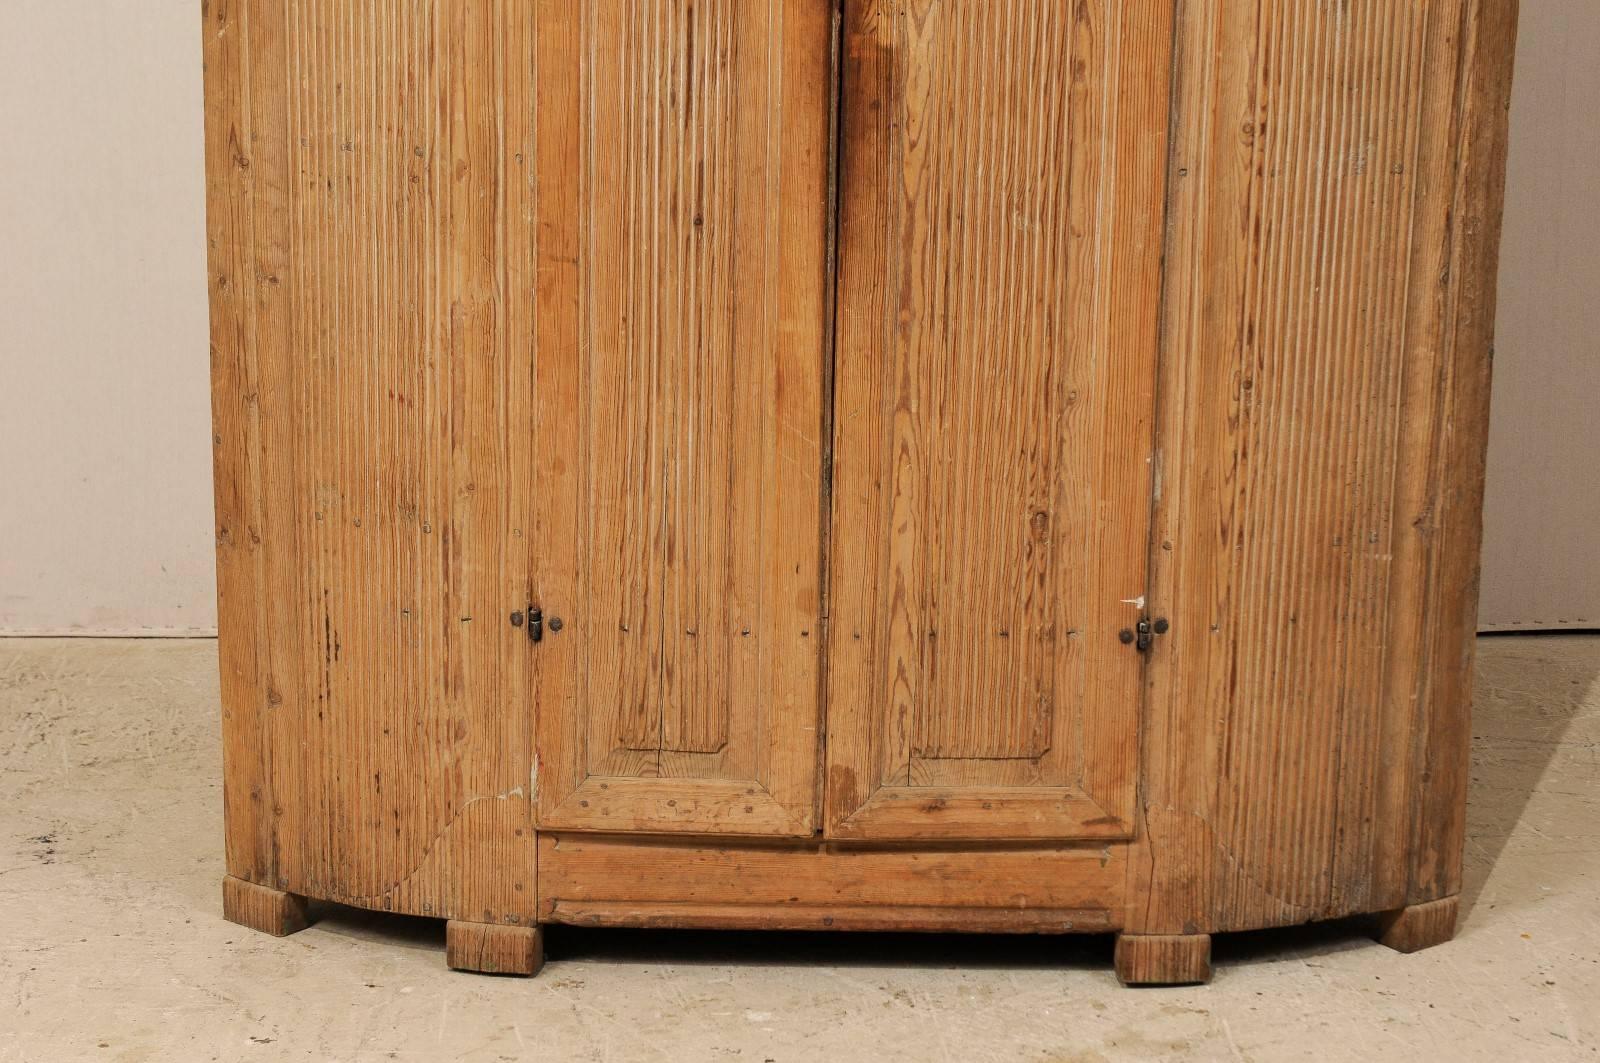 19th Century Period Gustavian Corner Cabinet, Vertical Reeds and Natural Wood In Good Condition For Sale In Atlanta, GA